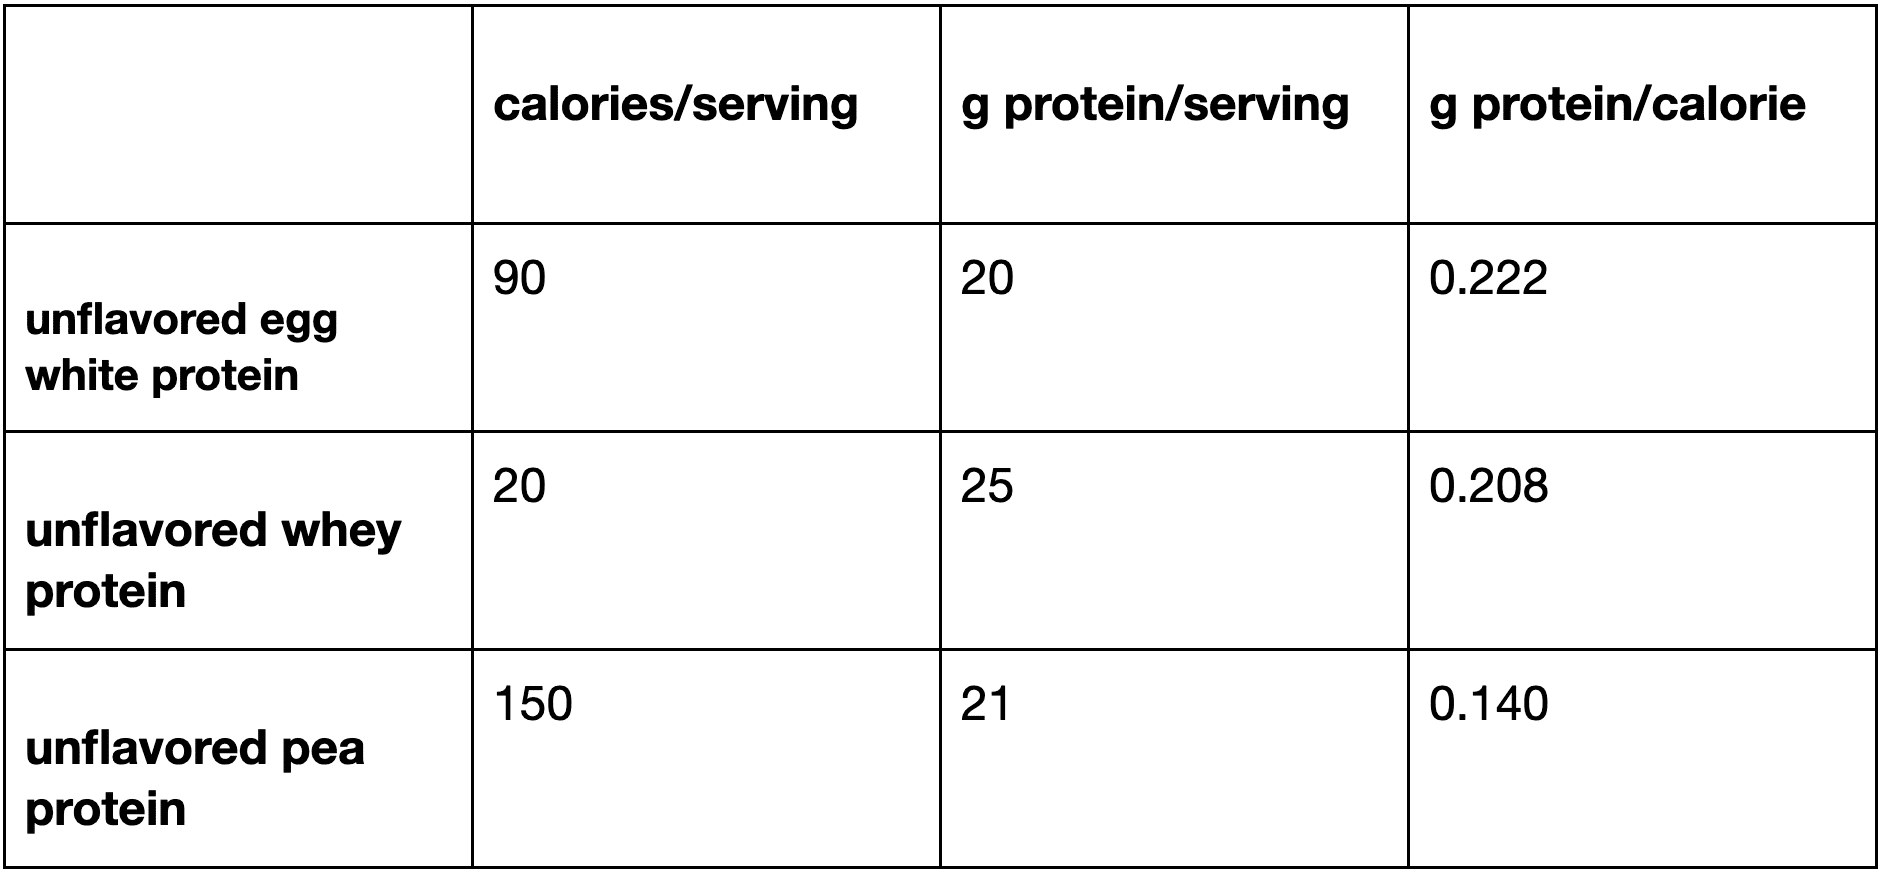 g protein/calorie